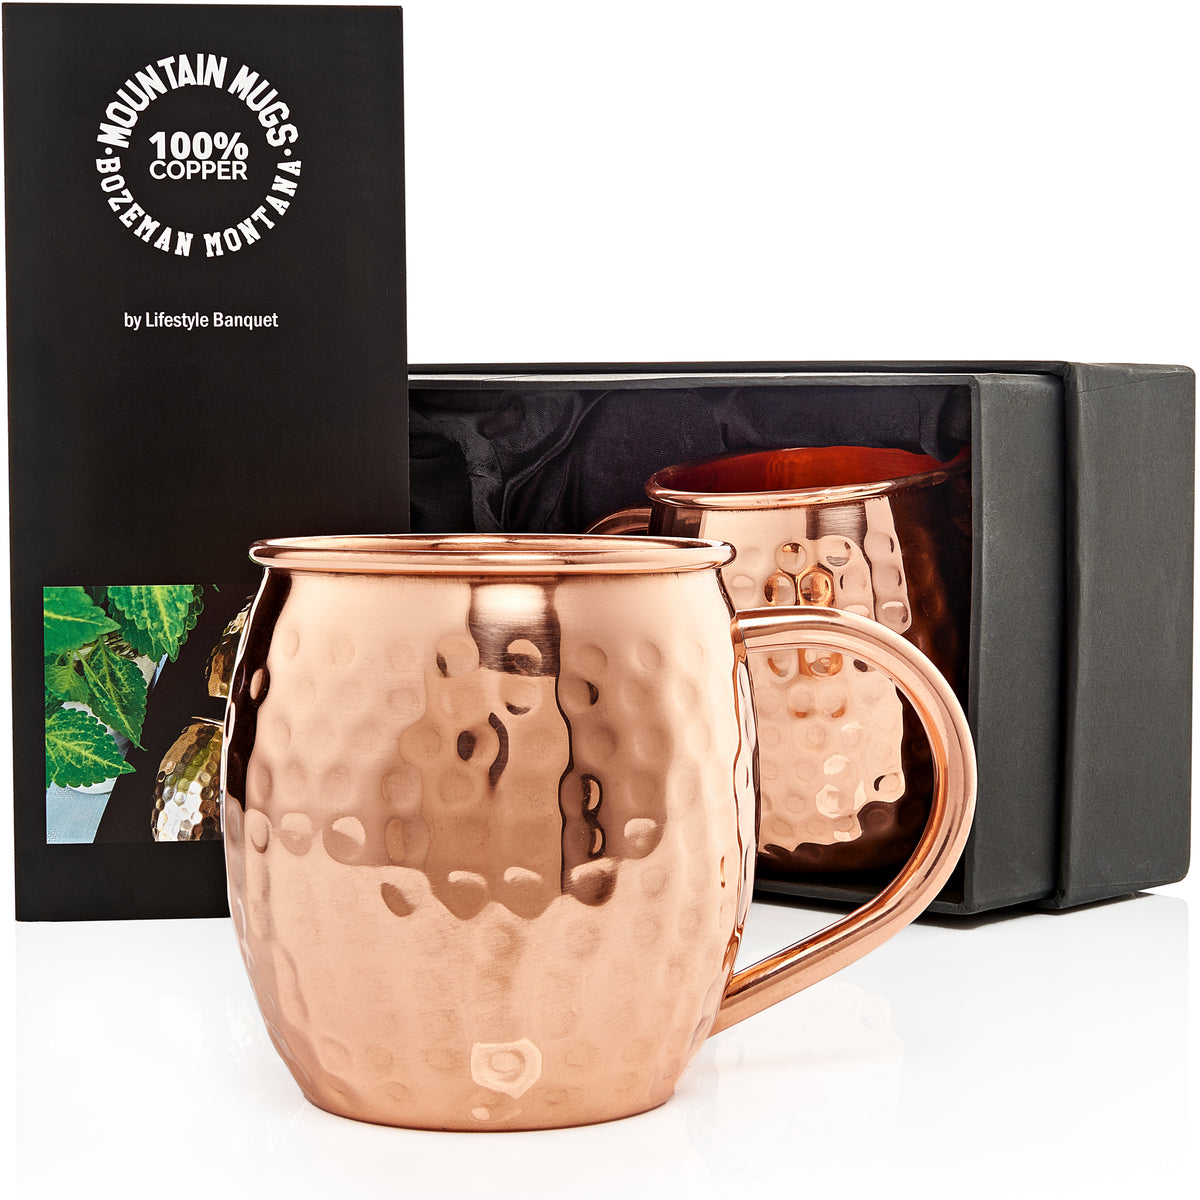 True Moscow Mule Mug Set of 2, Stainless Steel, Copper Finish, Holds 16 oz,  Cocktail Drinkware